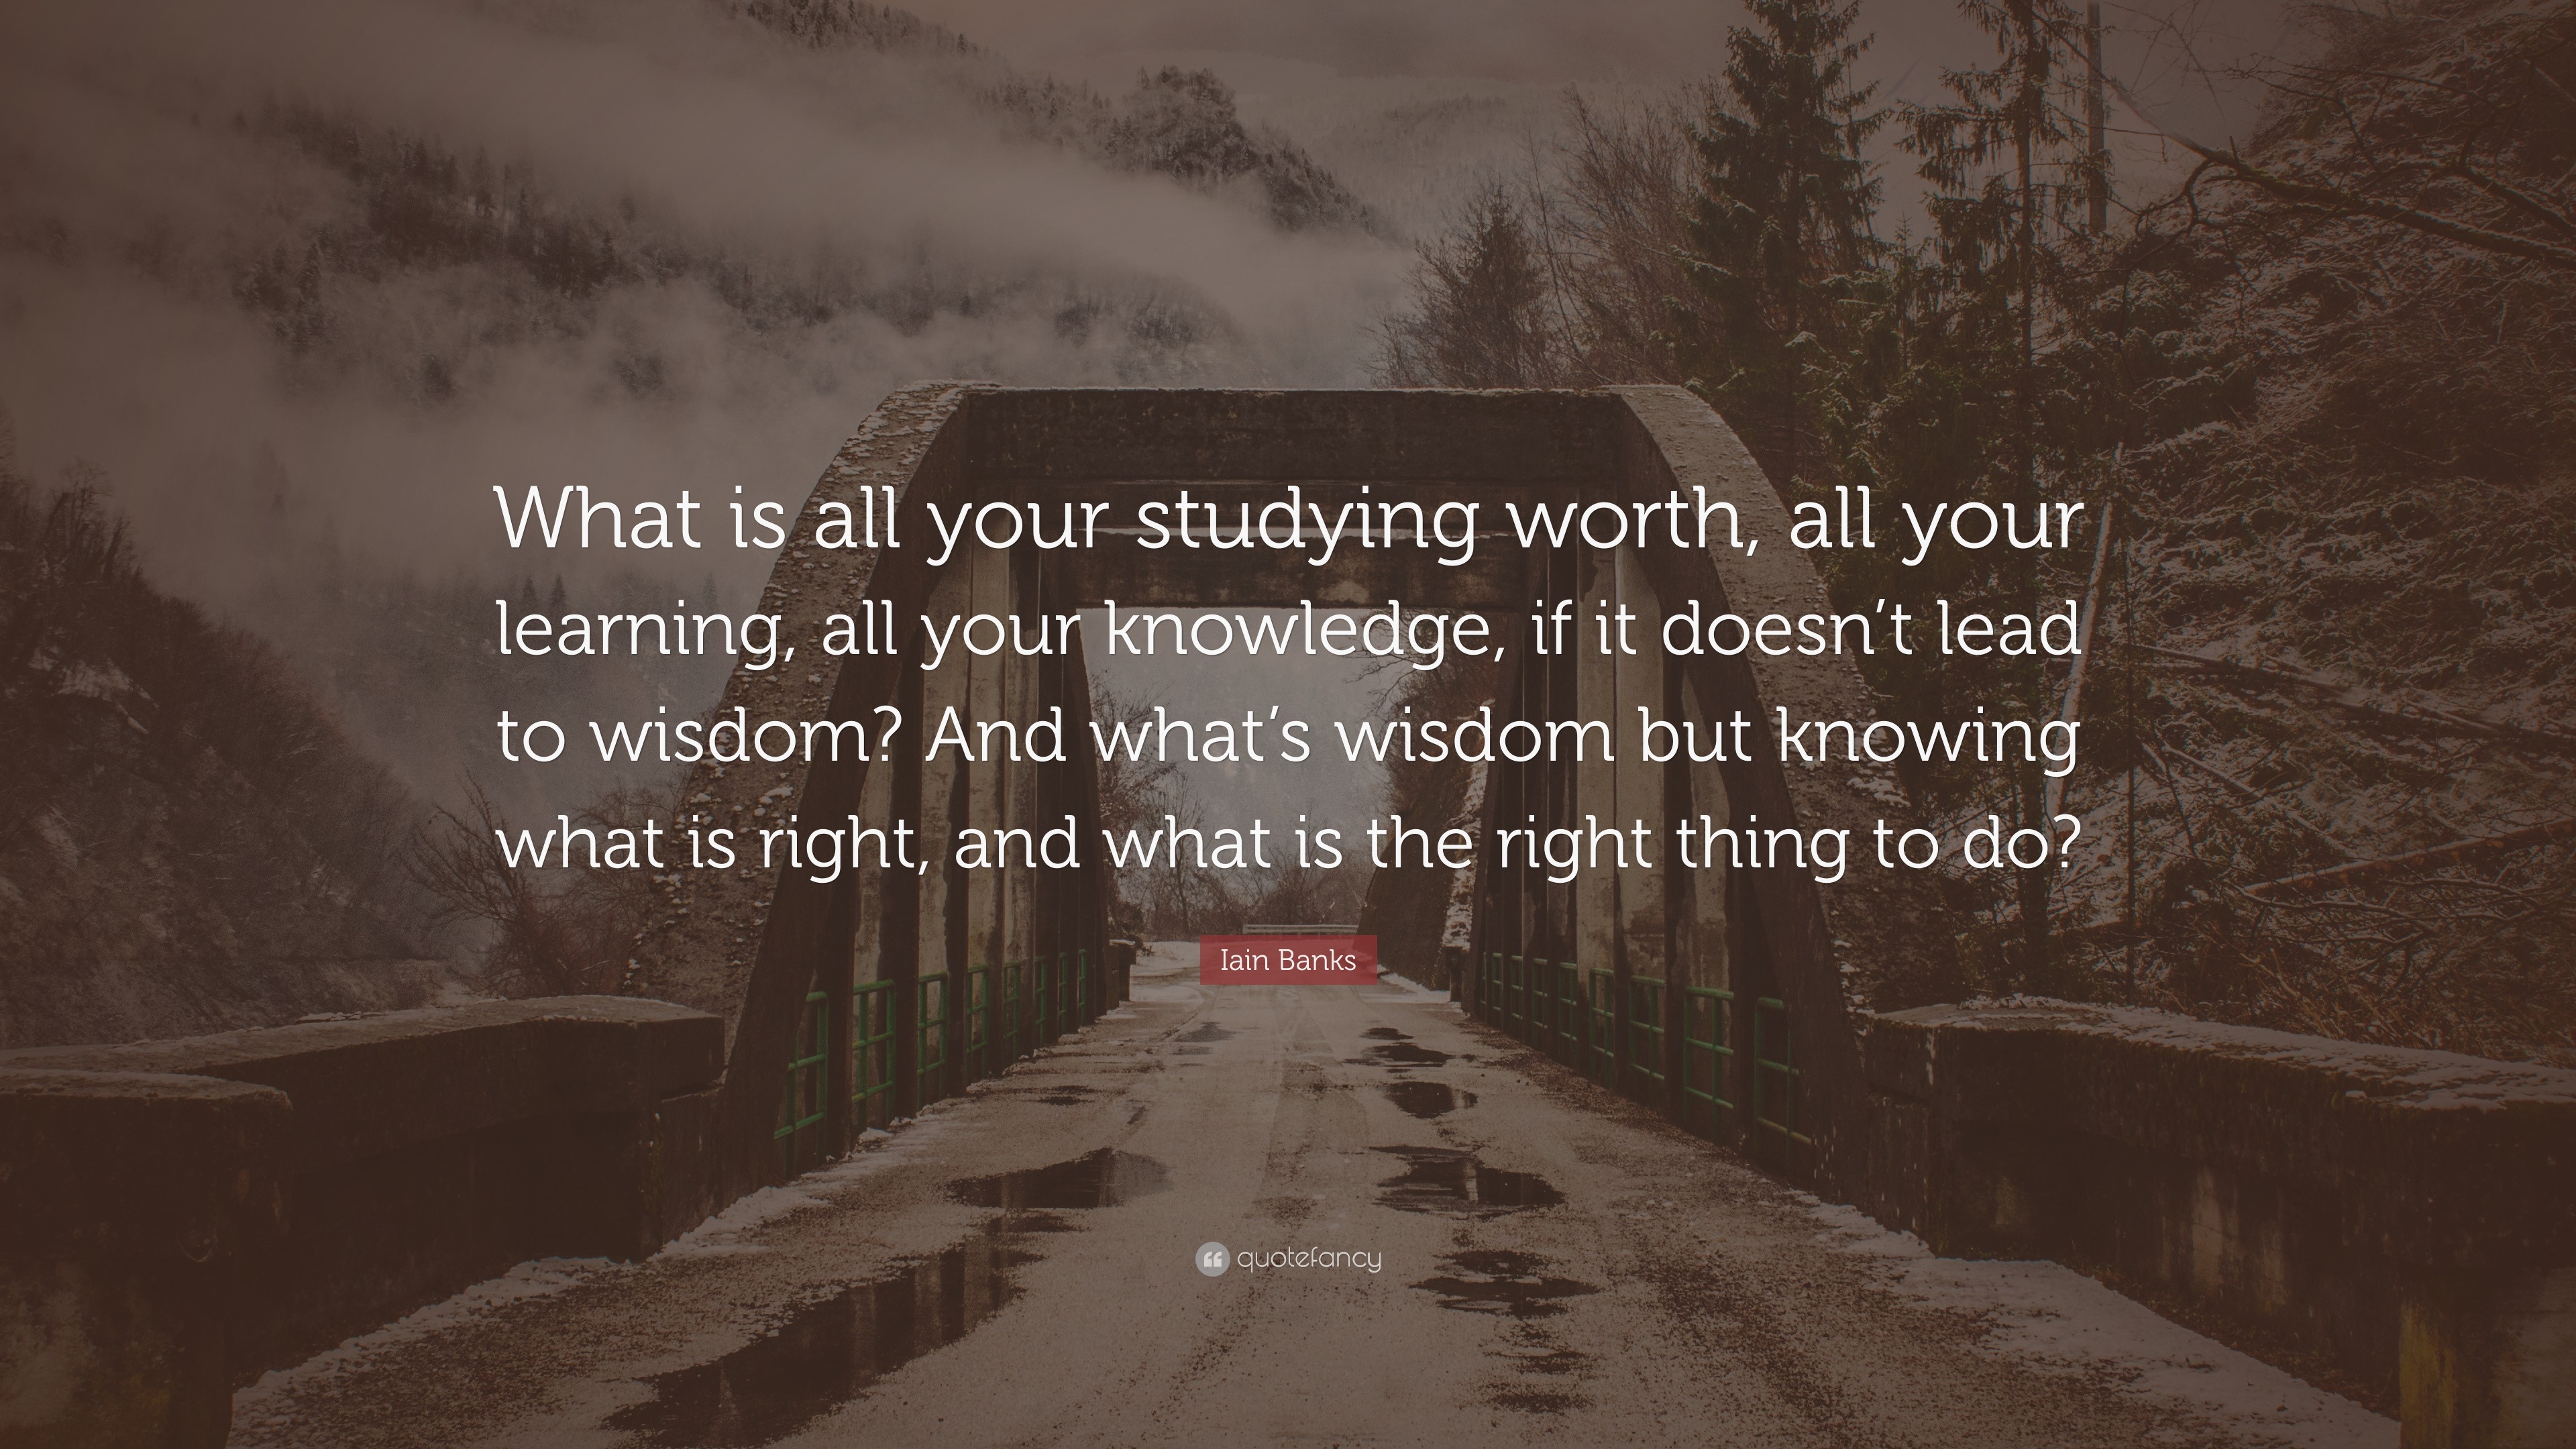 https://quotefancy.com/media/wallpaper/3840x2160/6211712-Iain-Banks-Quote-What-is-all-your-studying-worth-all-your-learning.jpg